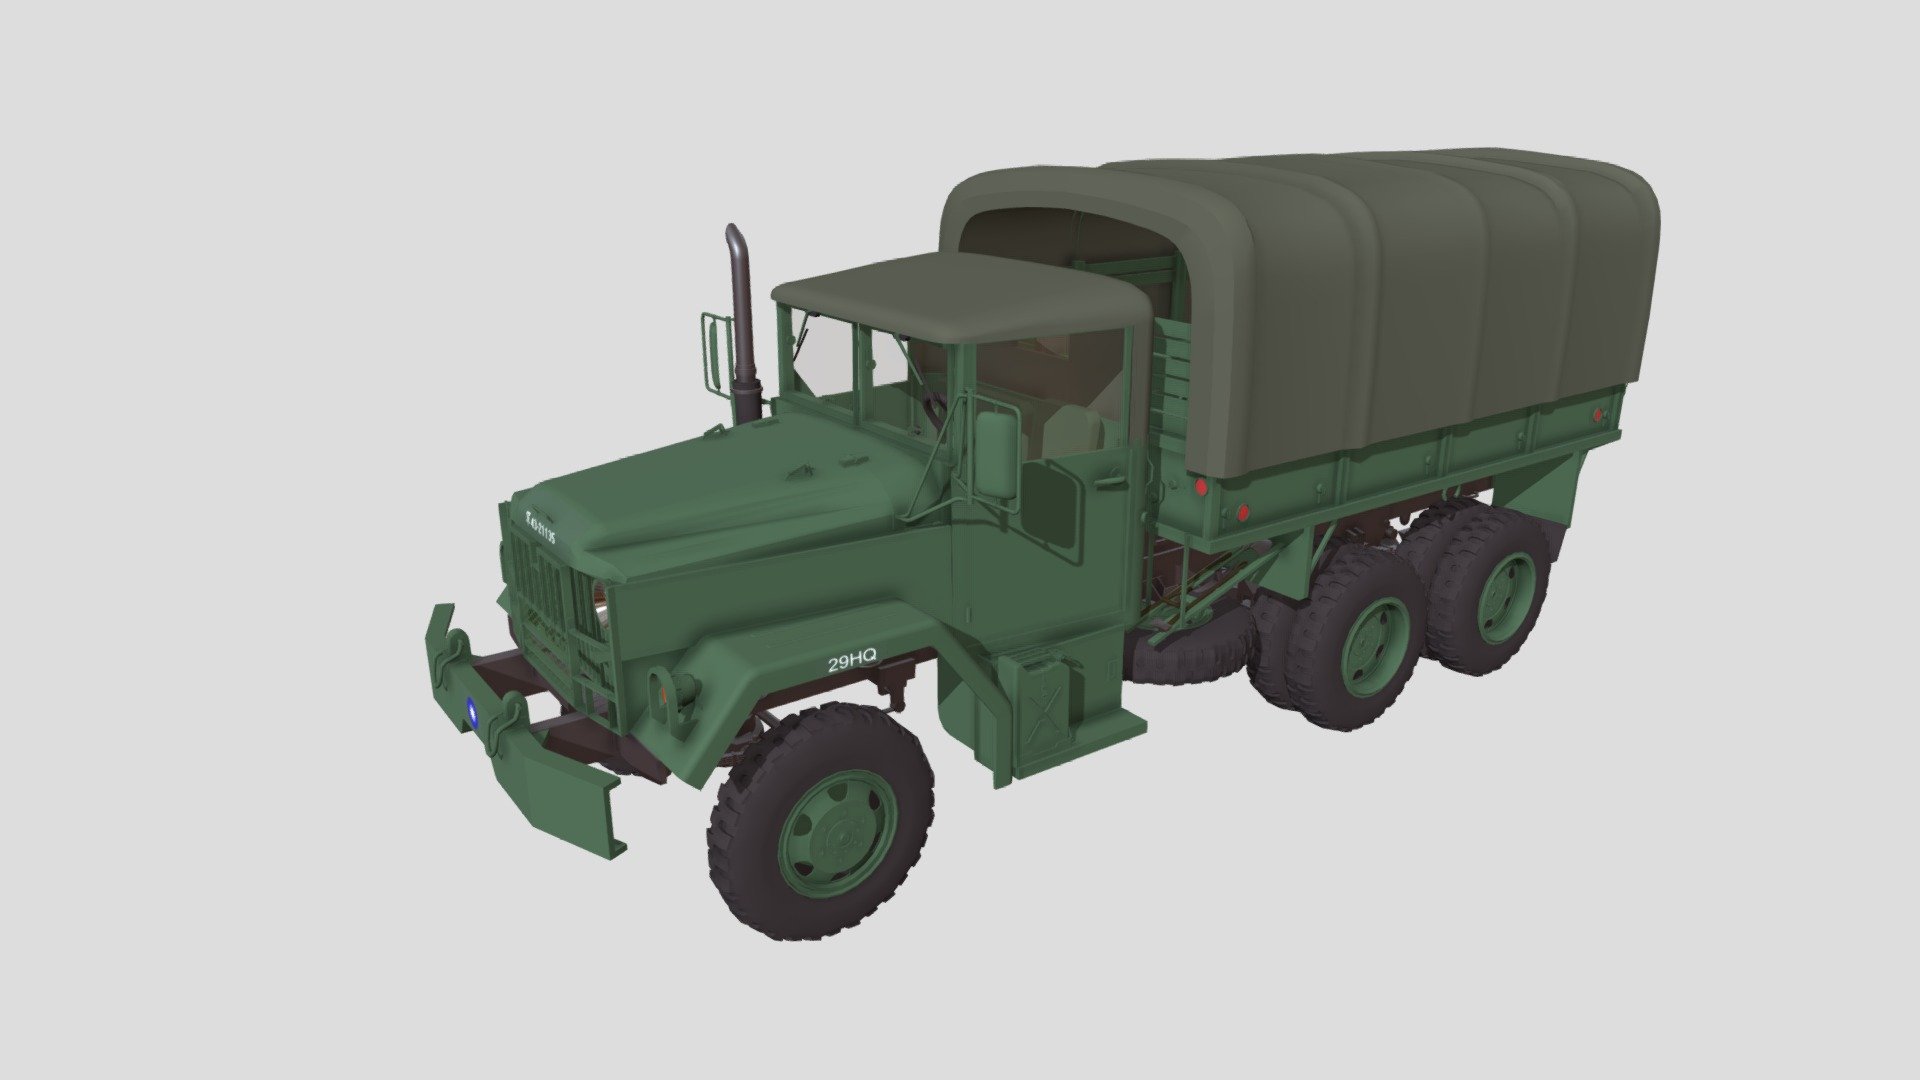 The M35 cargo truck is a 2½-ton 6×6 cargo truck initially used by the United States Army and subsequently utilized by many nations around the world. 

美製的M35A2是台灣80年代使用的多用途軍用卡車，是許多人的回憶之一。 - U.S. 2.5 ton cargo truck M35A2 (Taiwan) - 3D model by Basic Hsu (@Hsu.Pei.Ge) 3d model